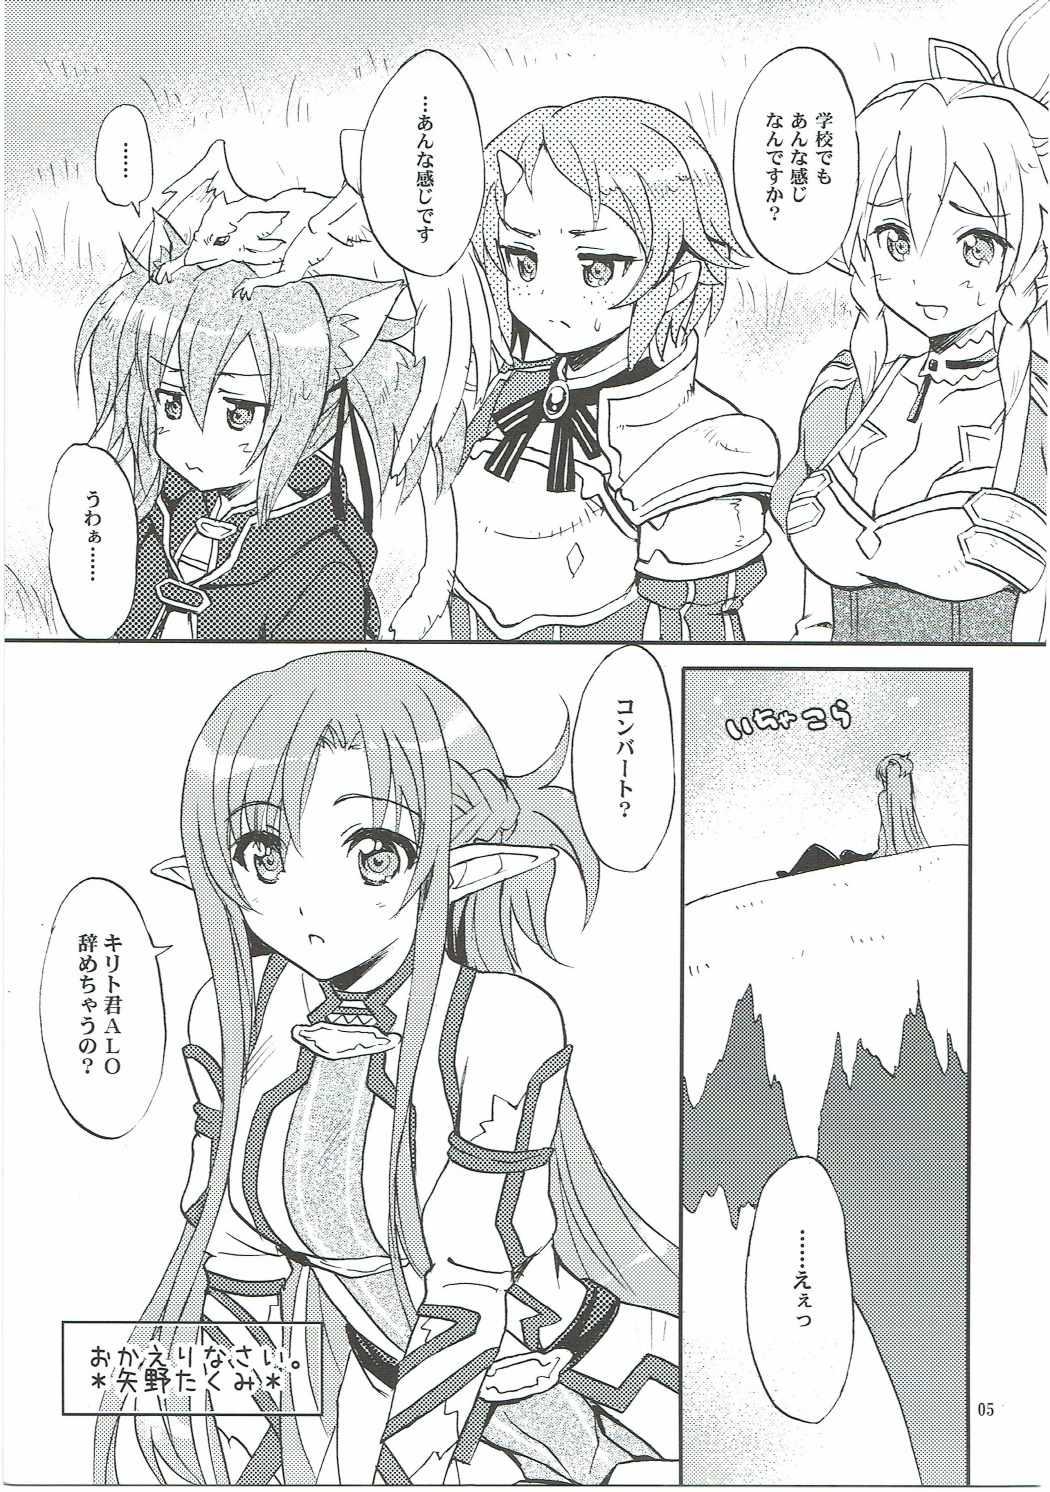 Beach Home Sweet Home 2 - Sword art online China - Page 4